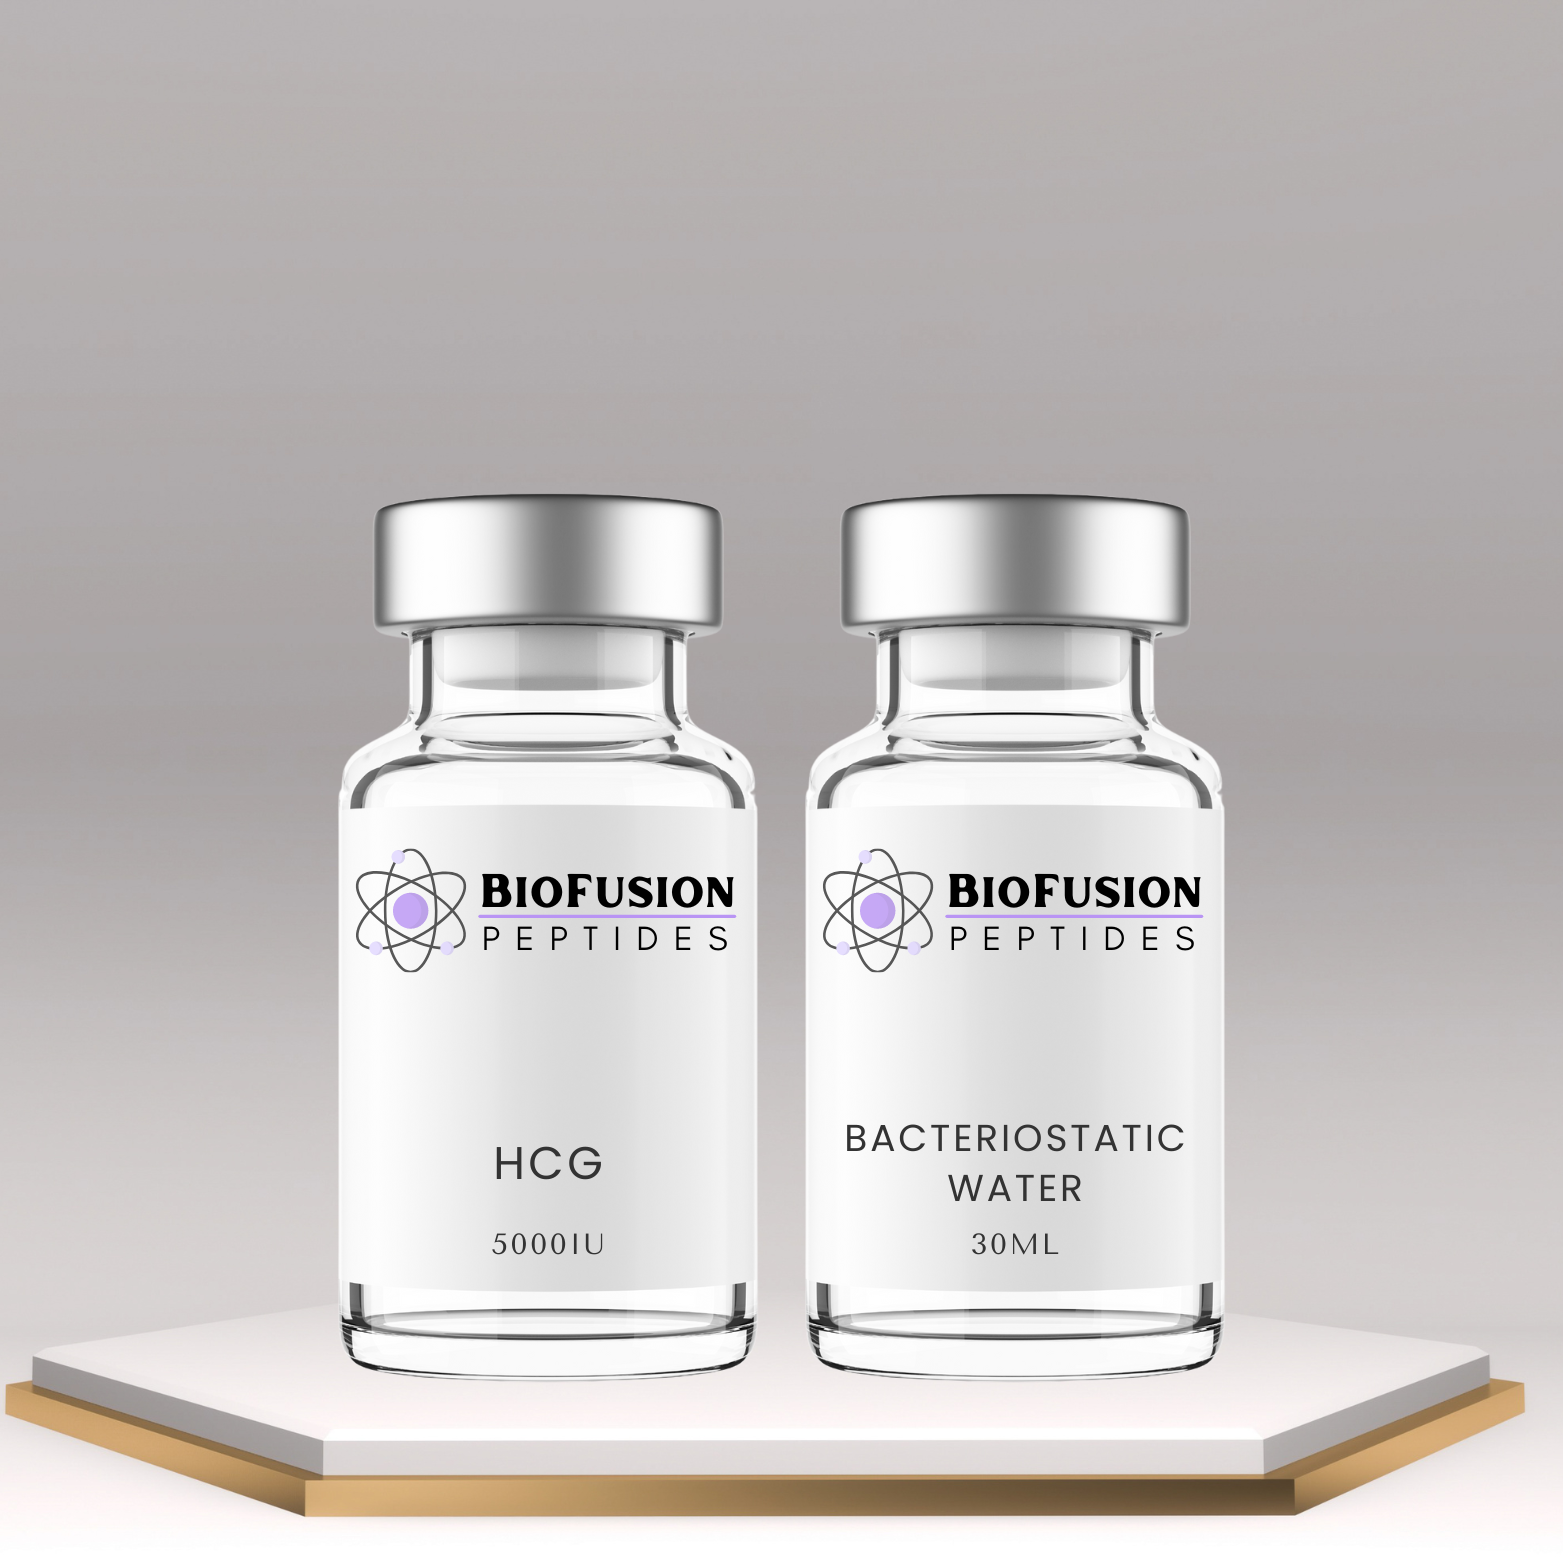 BioFusion Peptides HCG kit with bacteriostatic water